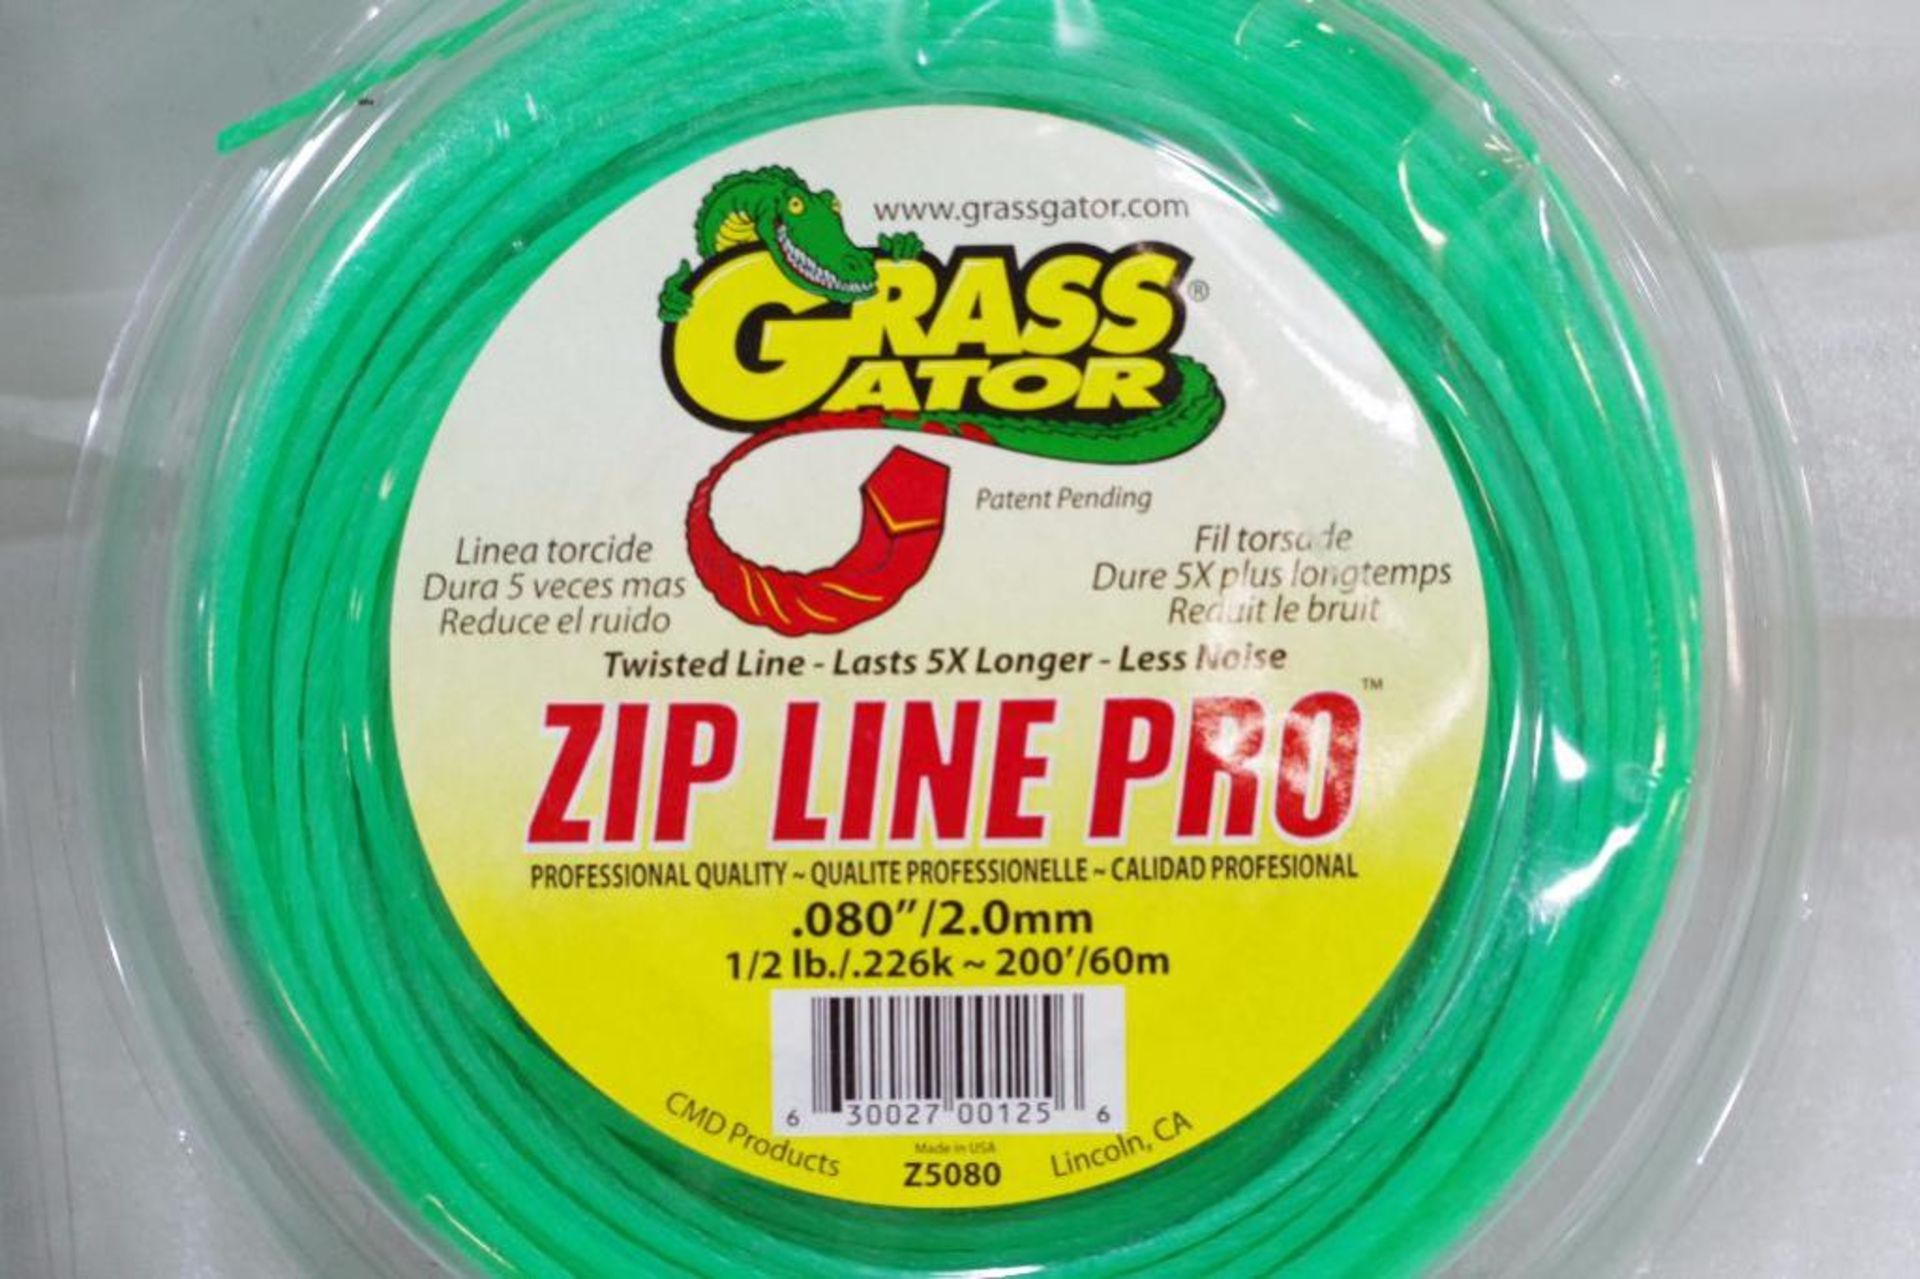 NEW GRASS GATOR Chrome Dome Replacement Trimmer Head and 200' Coil .080" Zip Line Pro - Image 2 of 5